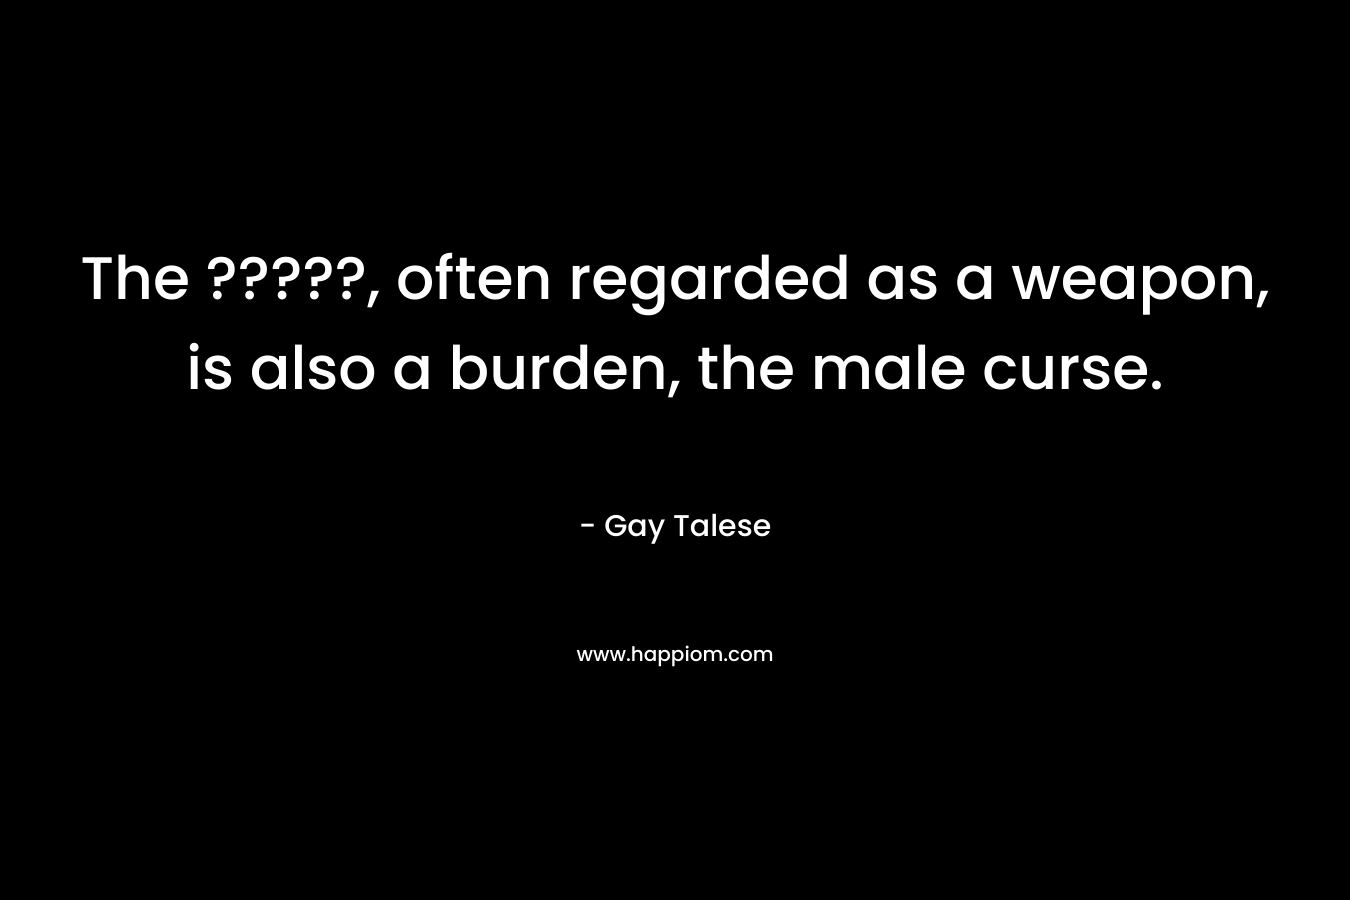 The ?????, often regarded as a weapon, is also a burden, the male curse. – Gay Talese